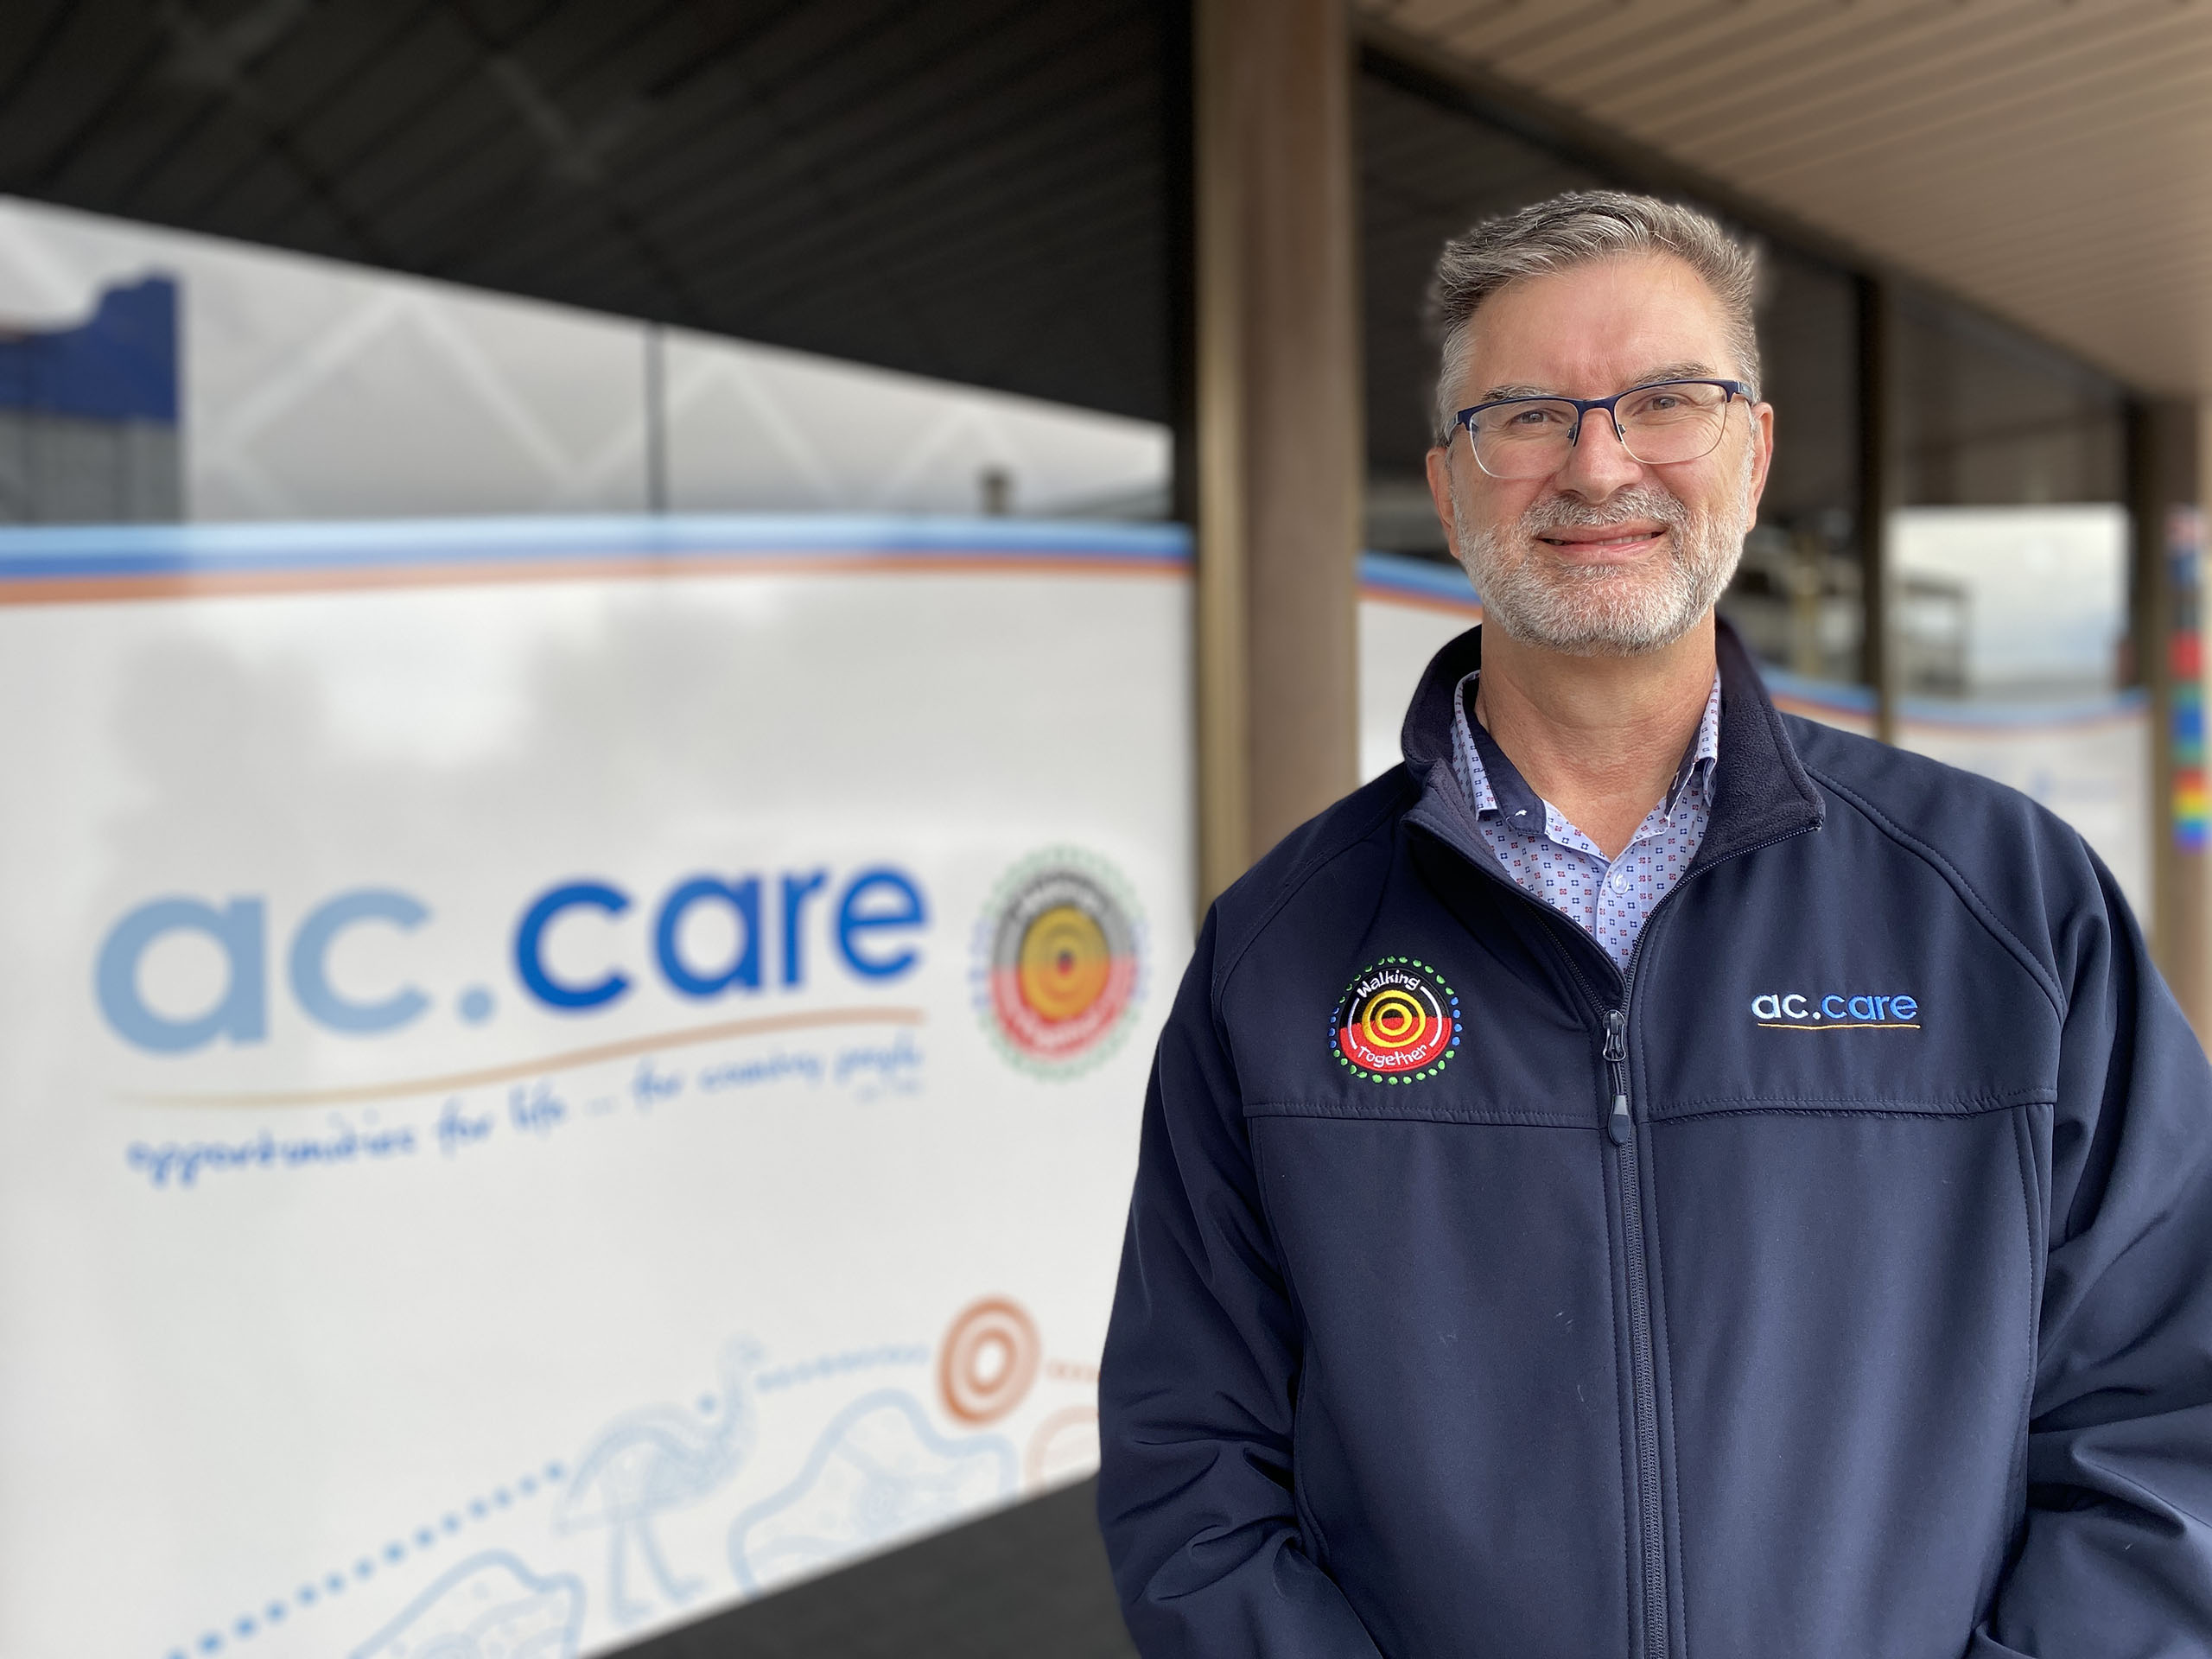 GRATEFUL: ac.care chief executive Shane Maddocks has praised foster carers across the region, along with other vital volunteers, for their contribution to supporting country South Australians in need of safe homes and positive relationships.